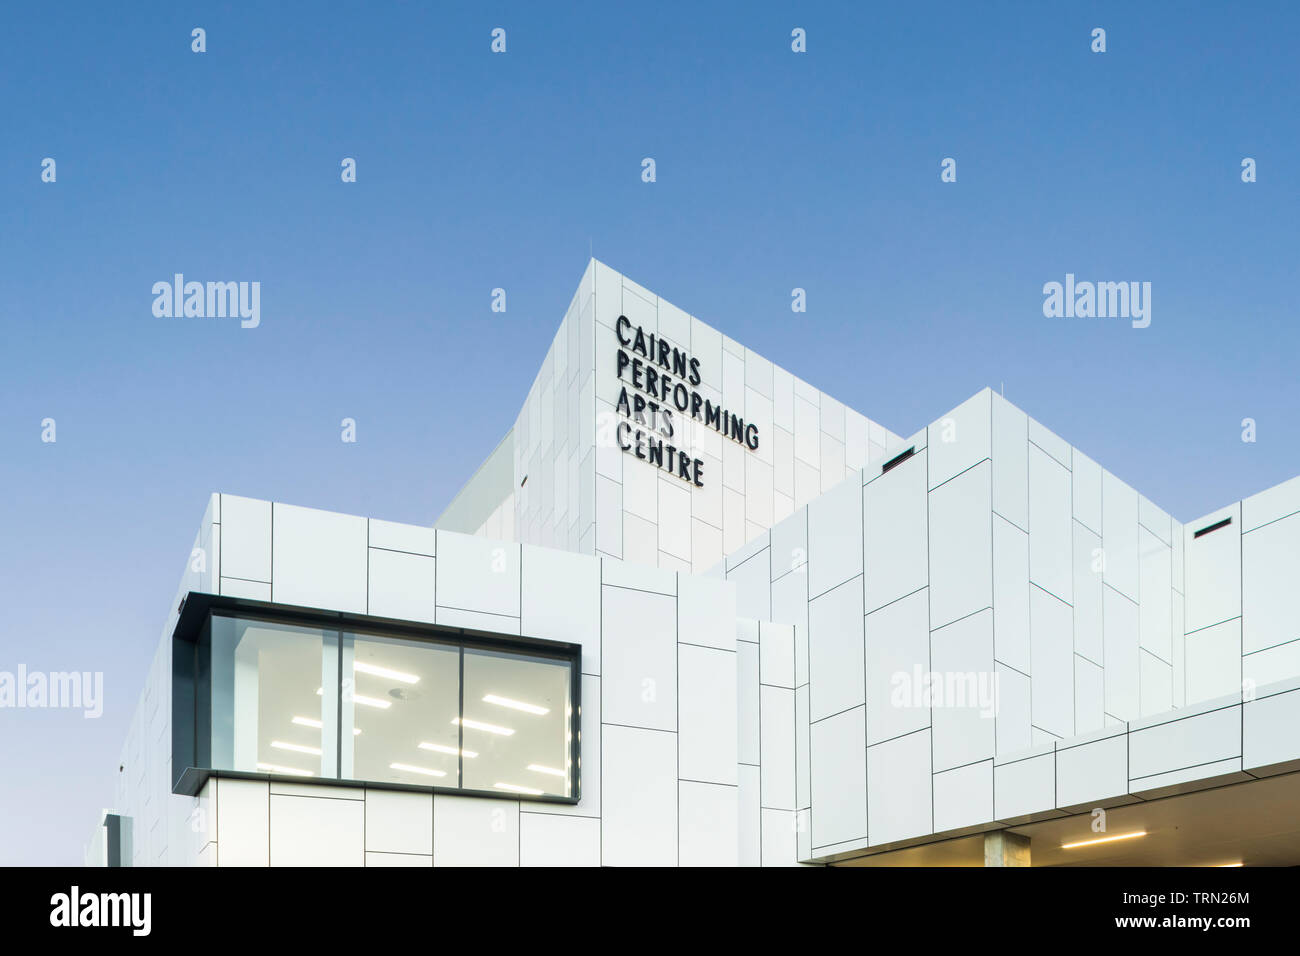 The rear facade of the Cairns Performing Arts Centre, Cairns, Queensland, Australia Stock Photo